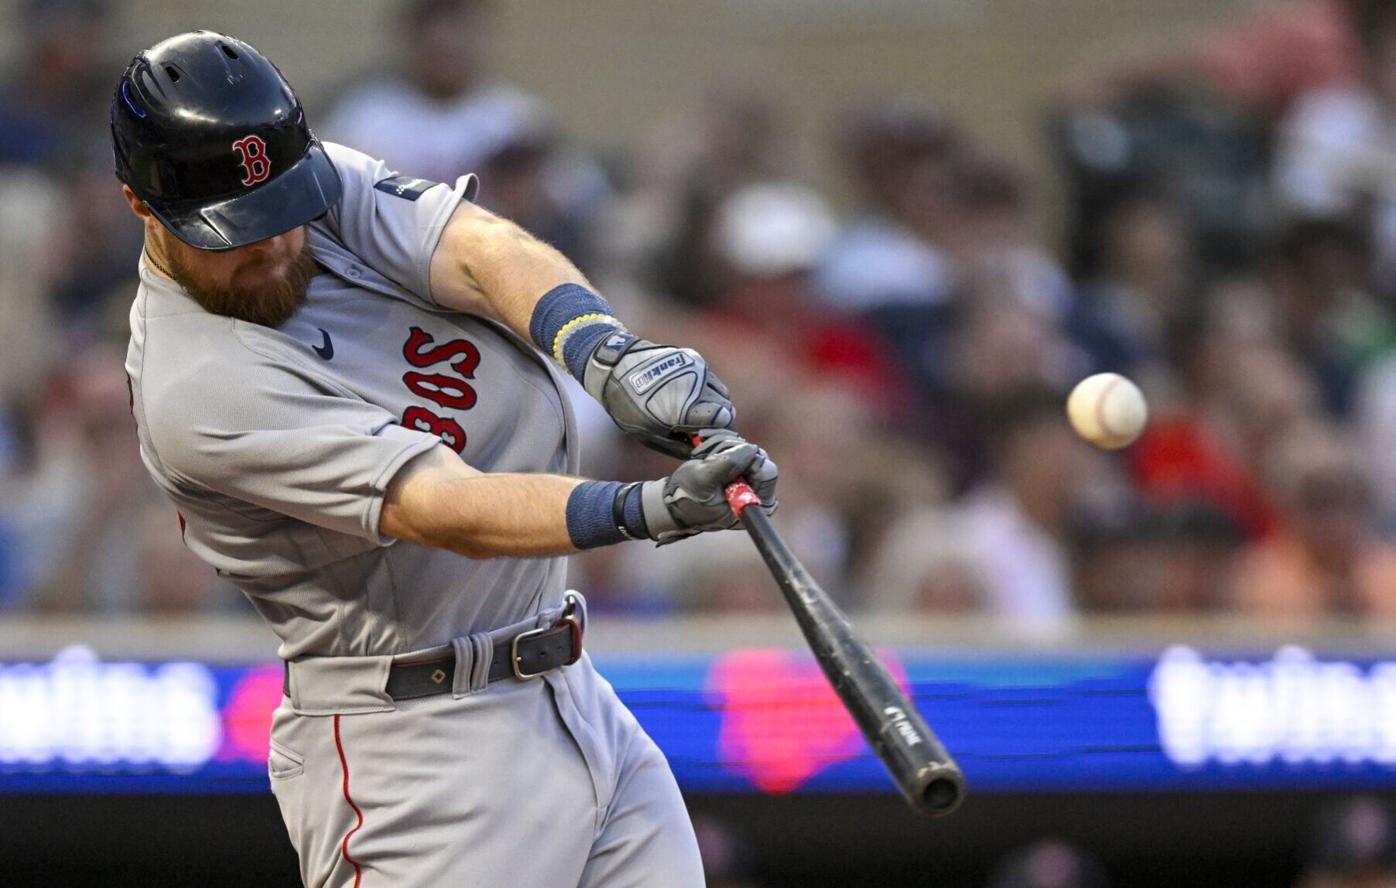 Arroyo has five hits, four RBIs as Red Sox beat Twins 10-4 for sixth  straight win